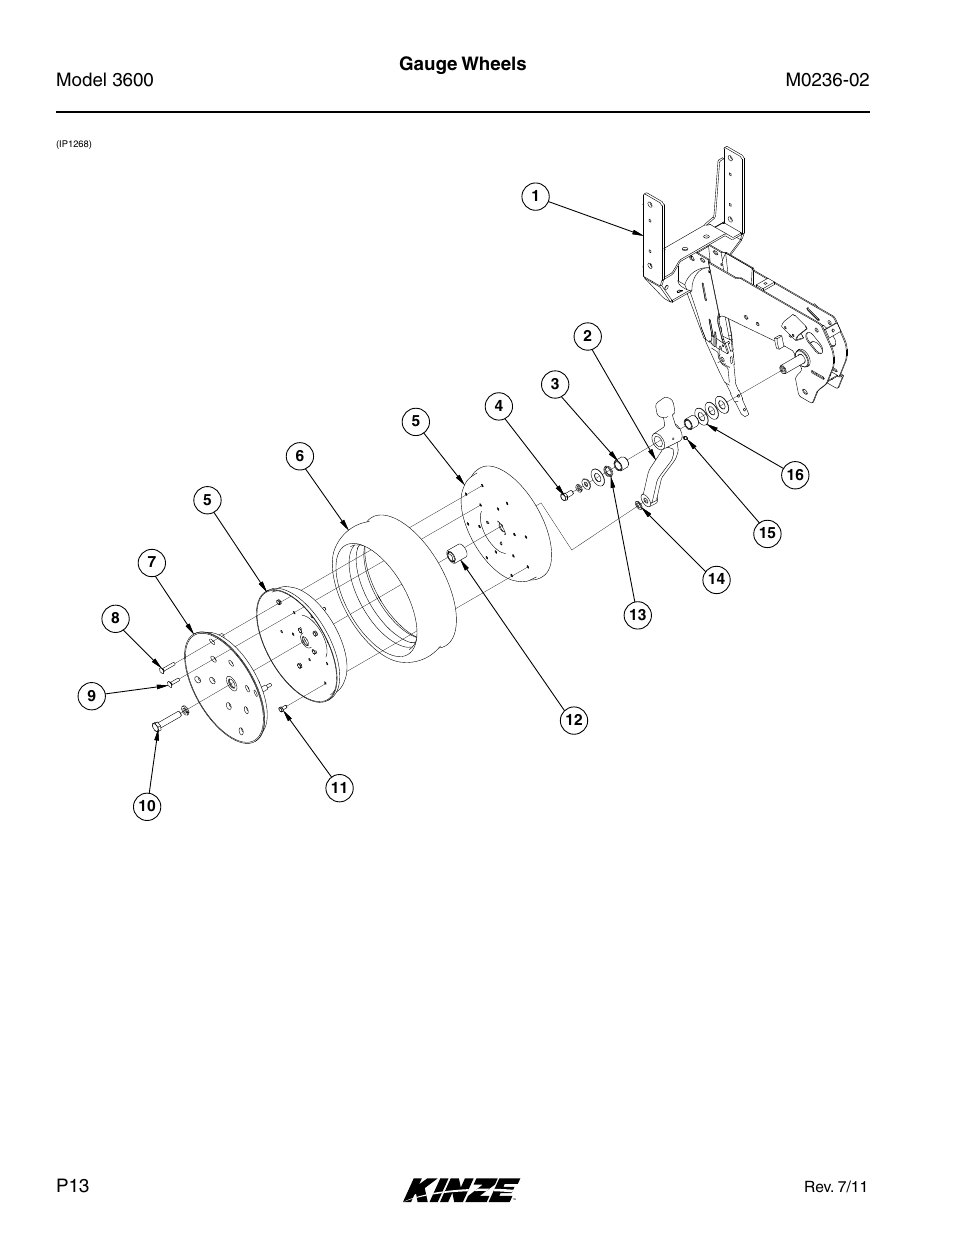 Gauge wheels, Rev. 7/11 | Kinze 3600 Lift and Rotate Planter Rev. 5/14 User Manual | Page 16 / 302